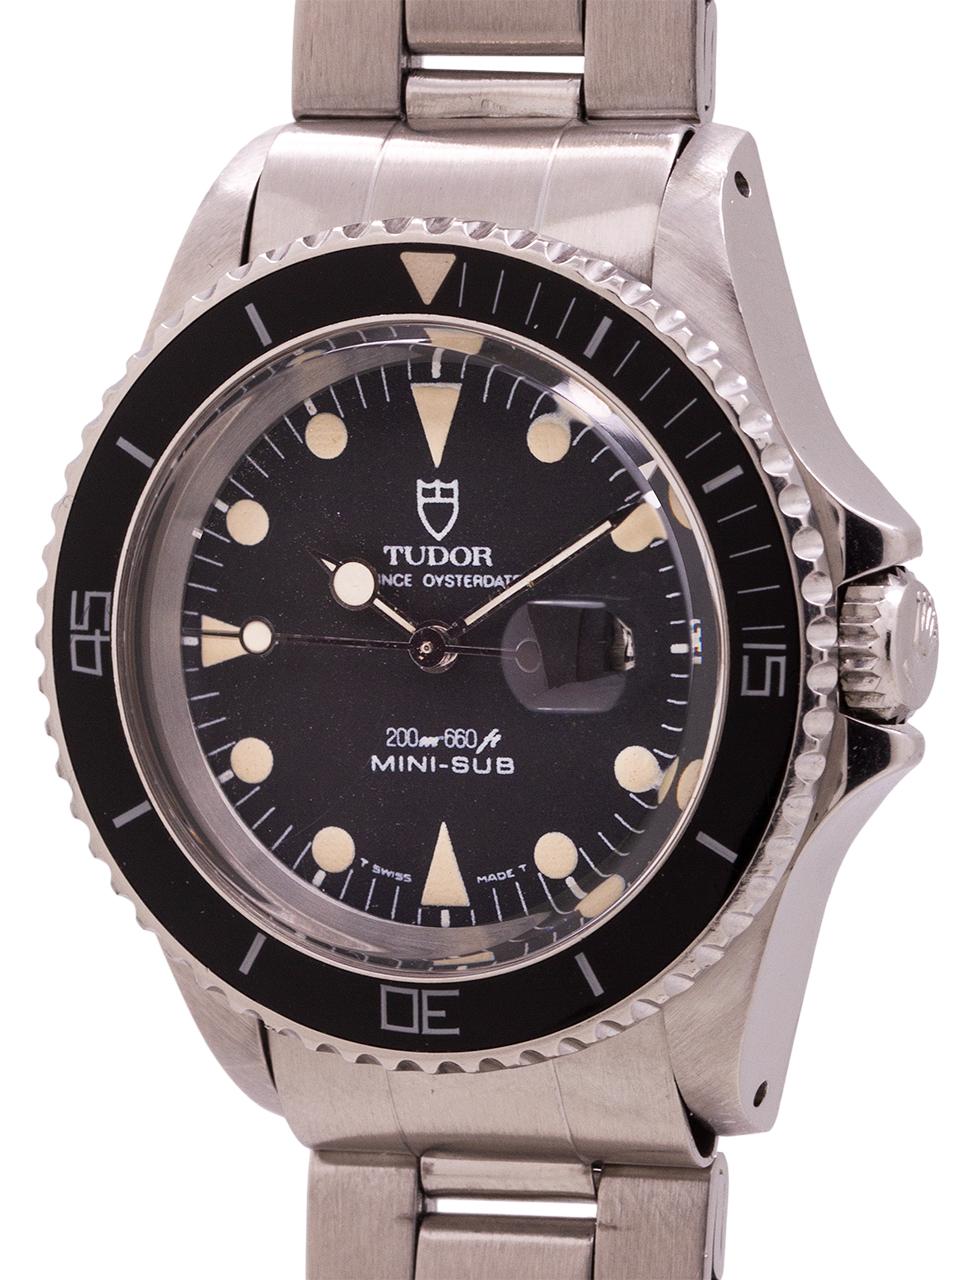 
Tudor Mini-Sub ref 9440 serial #169,xxx circa 1985. 33 x 39mm stainless steel case with black elapsed time bezel and acrylic crystal. Original matte black dial with slightly aged luminous indexes and hands. Dial signed with Tudor Shield, Tudor